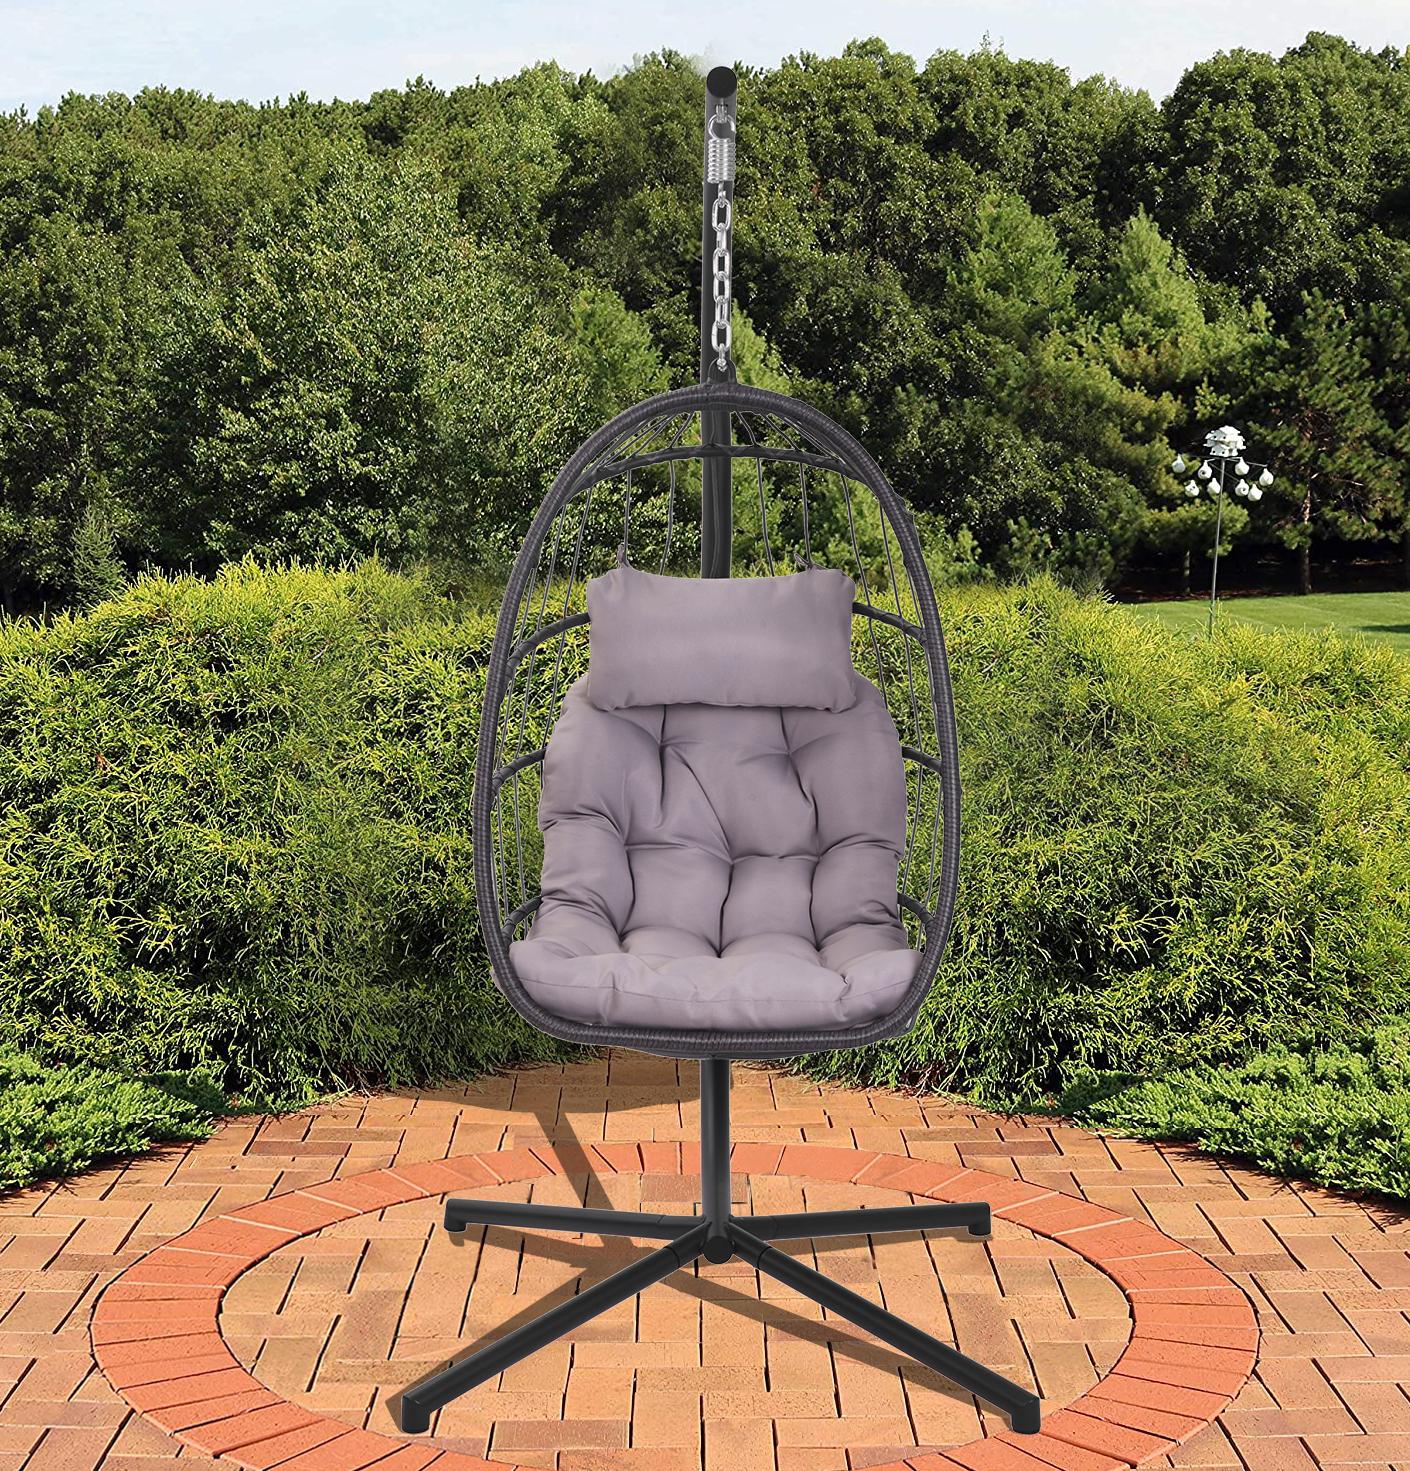 Outdoor Swing Chair, Wicker Egg Chair with Stand and Cushions, Hanging Chair for Bedroom Patio Porch Balcony, Hammock Chair Outdoor Lounger, Gray - image 2 of 6